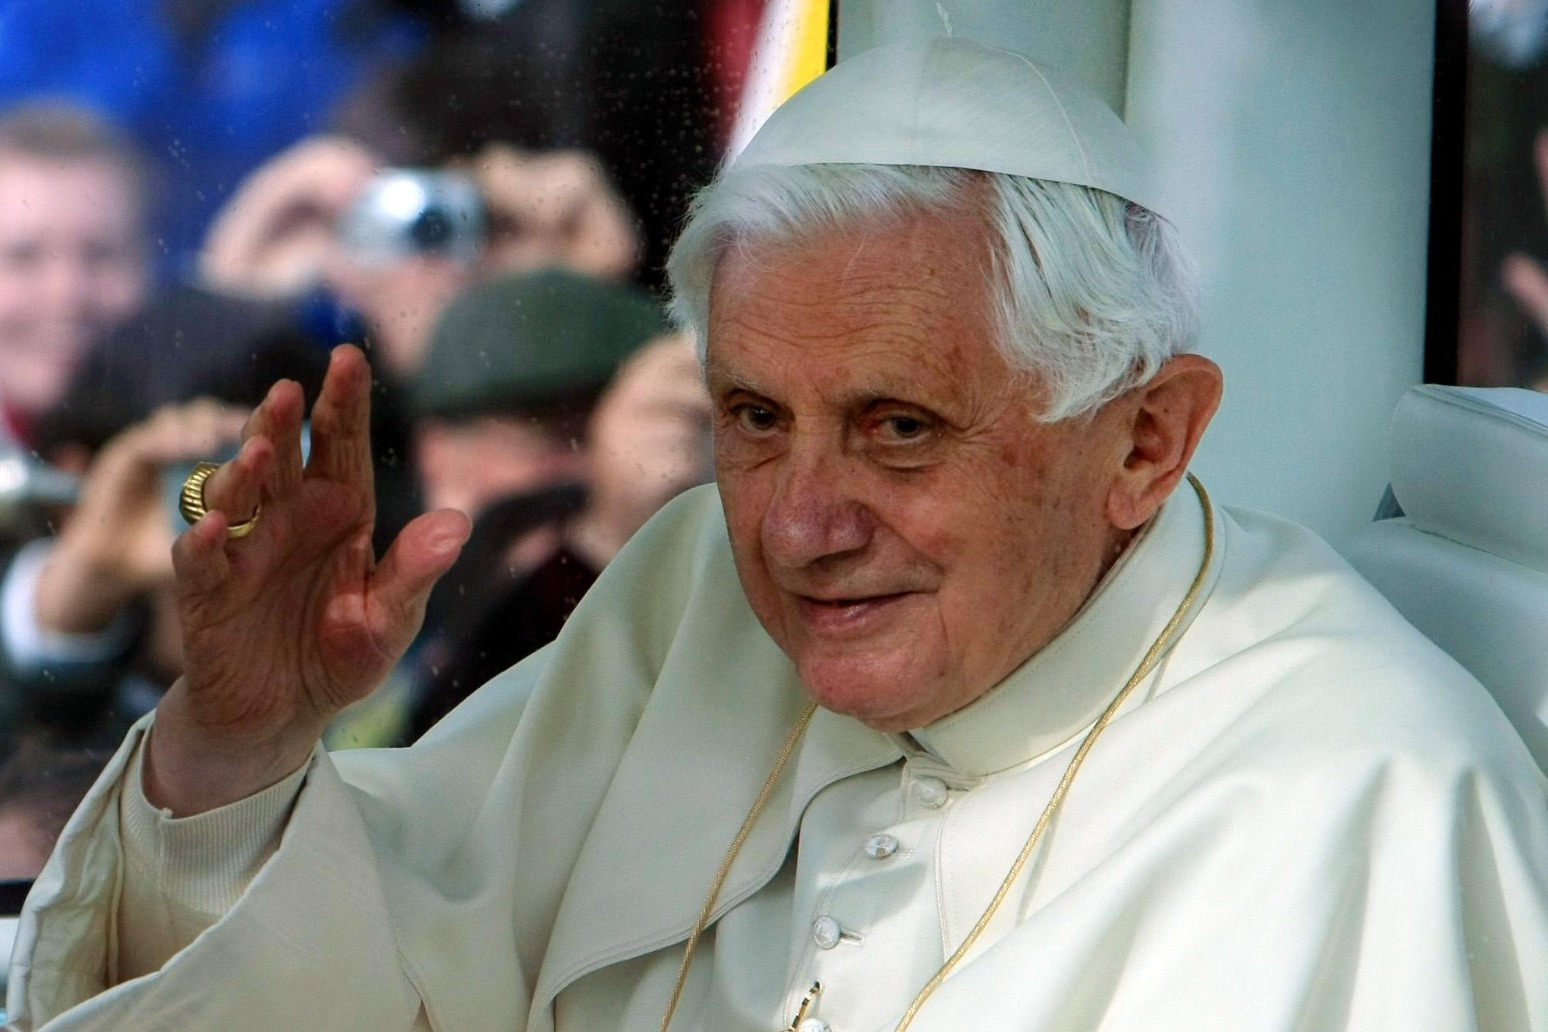 Former Pope Benedict XVI dies at the age of 95 